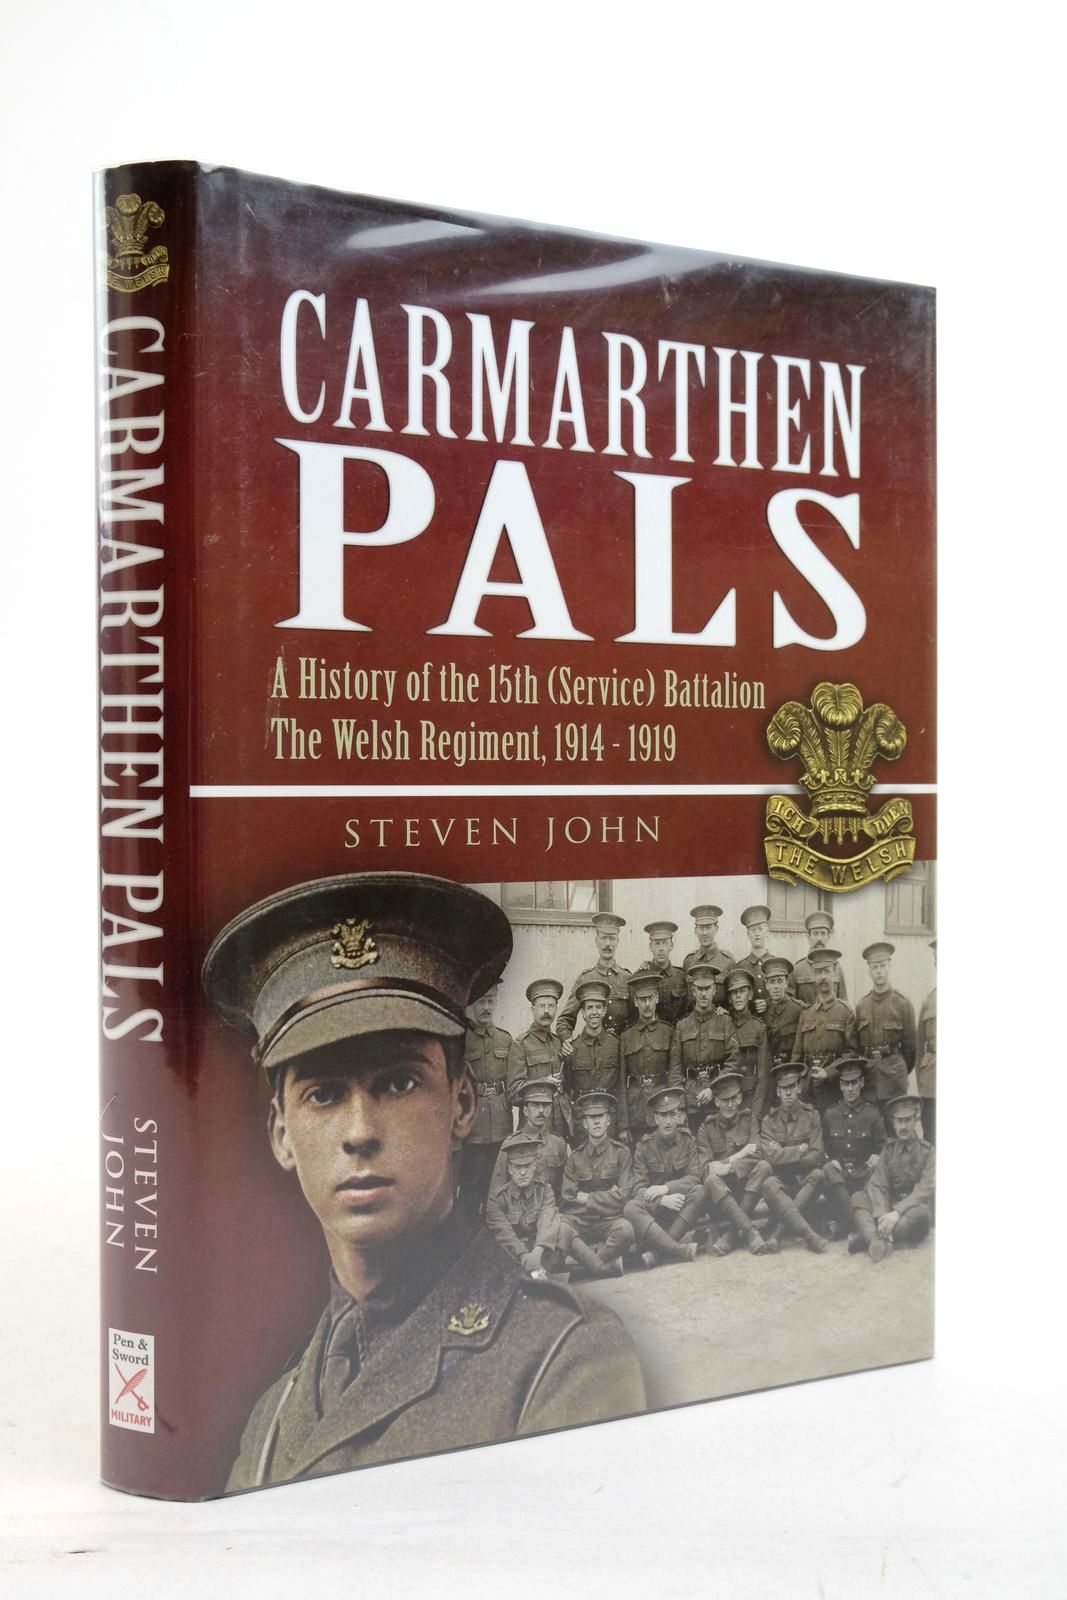 Photo of CARMARTHEN PALS: A HISTORY OF THE 15TH (SERVICE) BATTALION THE WELSH REGIMENT, 1914 - 1919 written by John, Steven published by Pen & Sword Military (STOCK CODE: 2138336)  for sale by Stella & Rose's Books